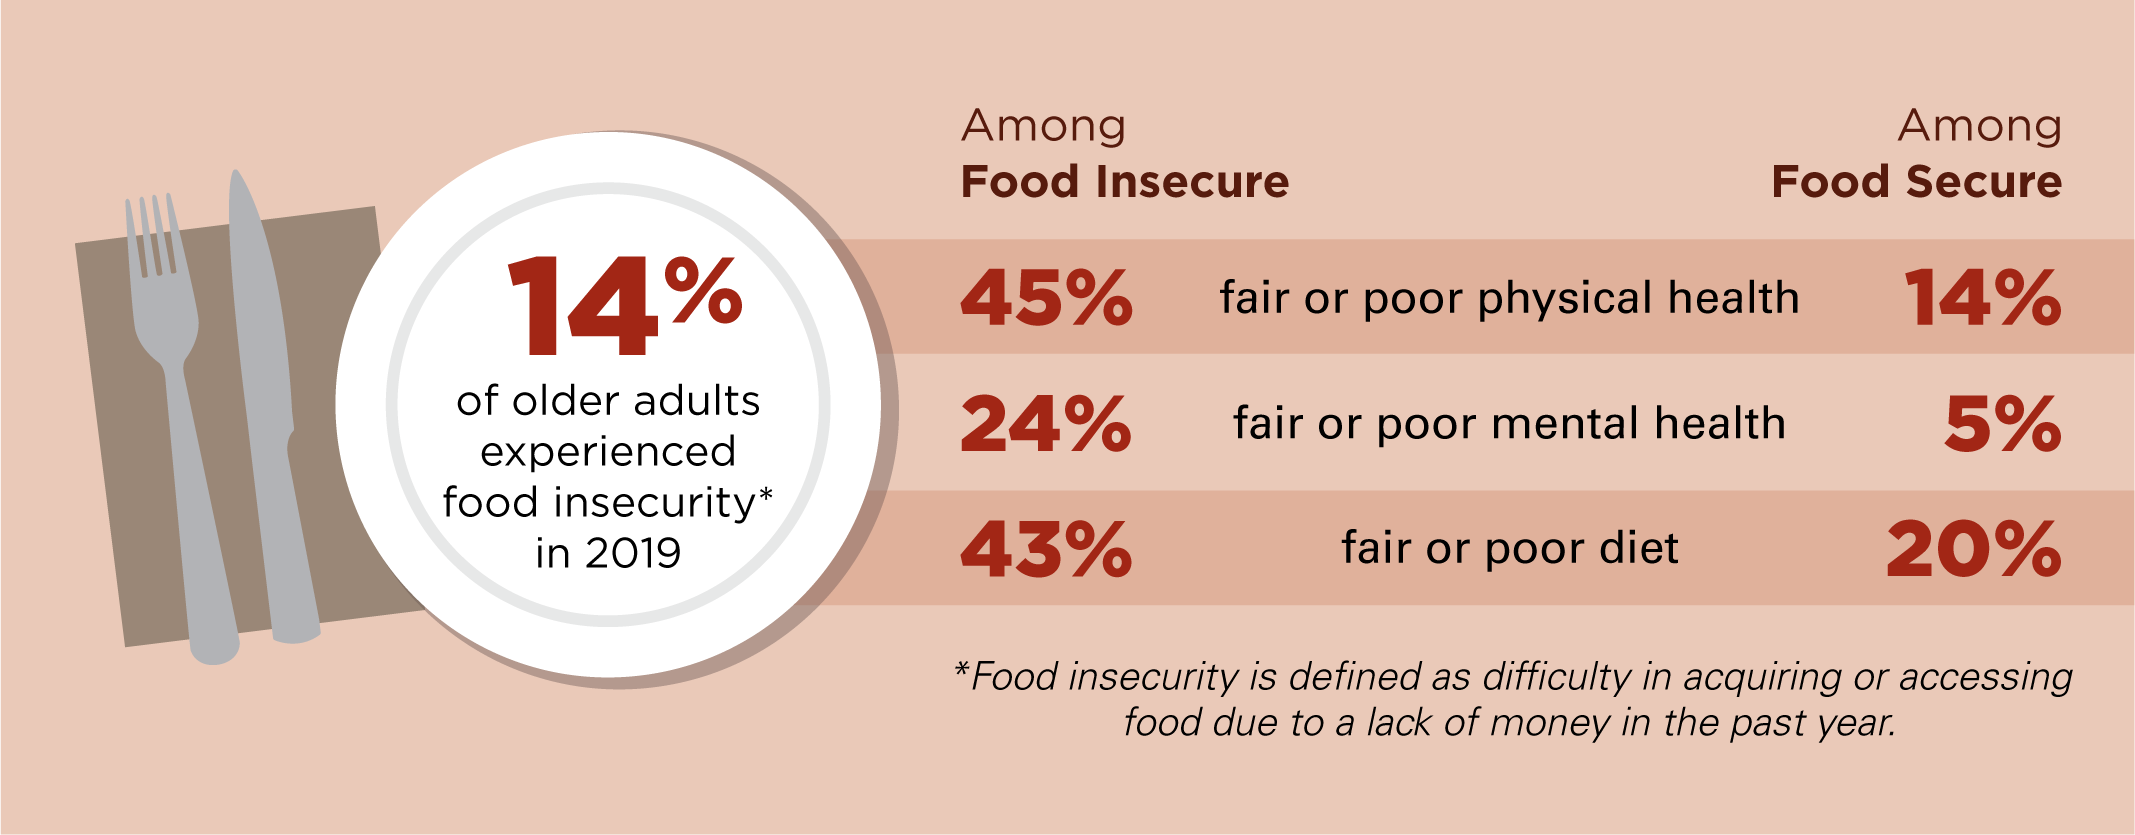 Fourteen percent of older adults experienced food insecurity* in 2019